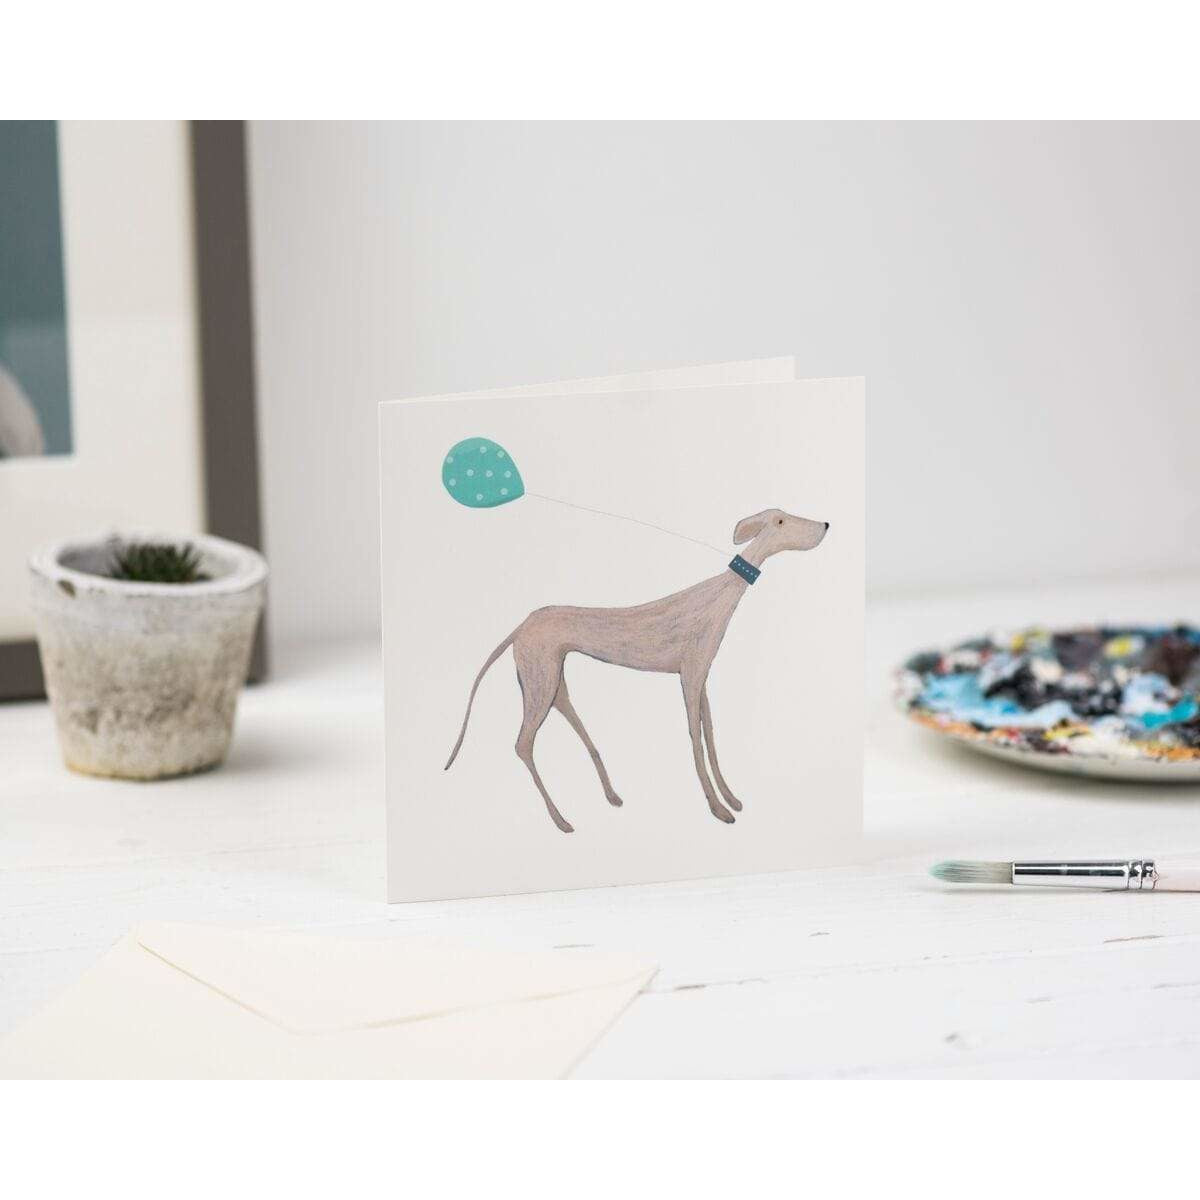 Print Circus Greetings Card Standing Hound with Balloon Greetings Card